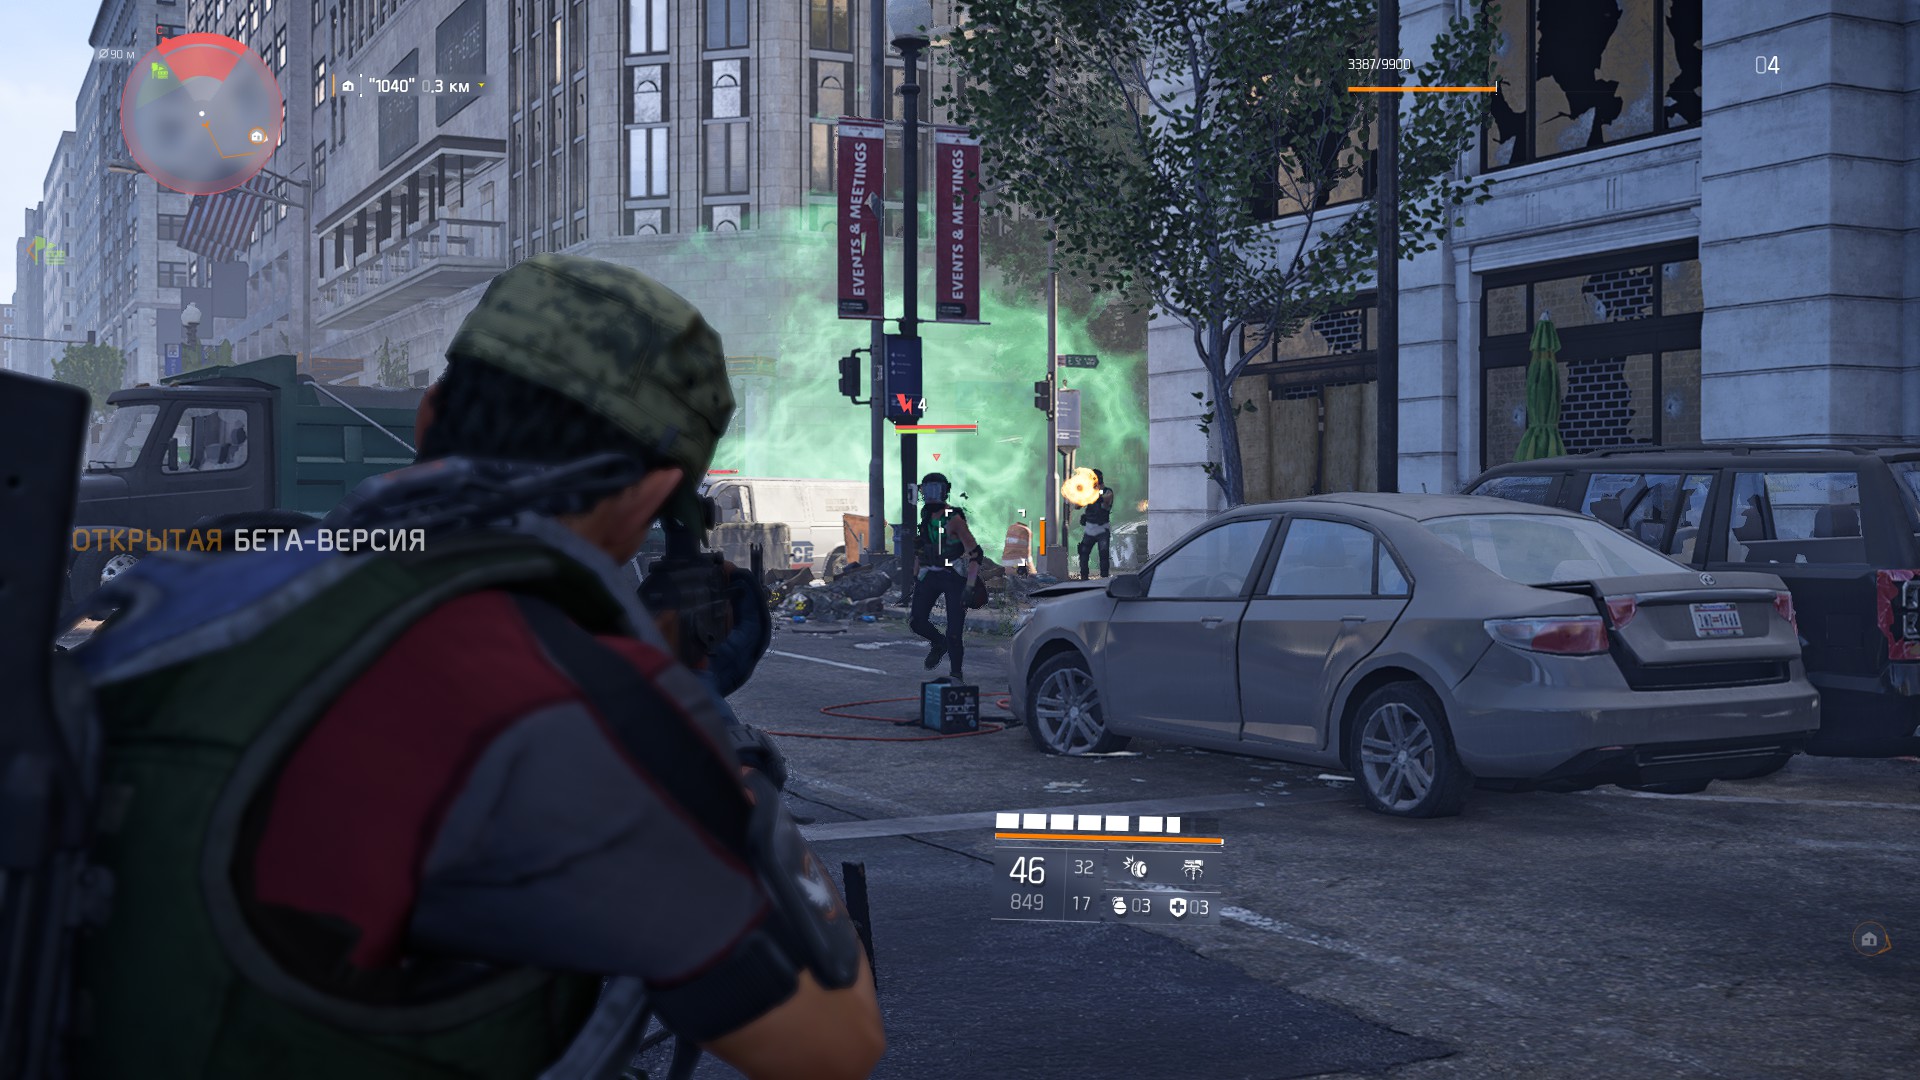 Tom Clancy’s The Division 2 - Open Beta2019-3-2-20-12-54.jpg